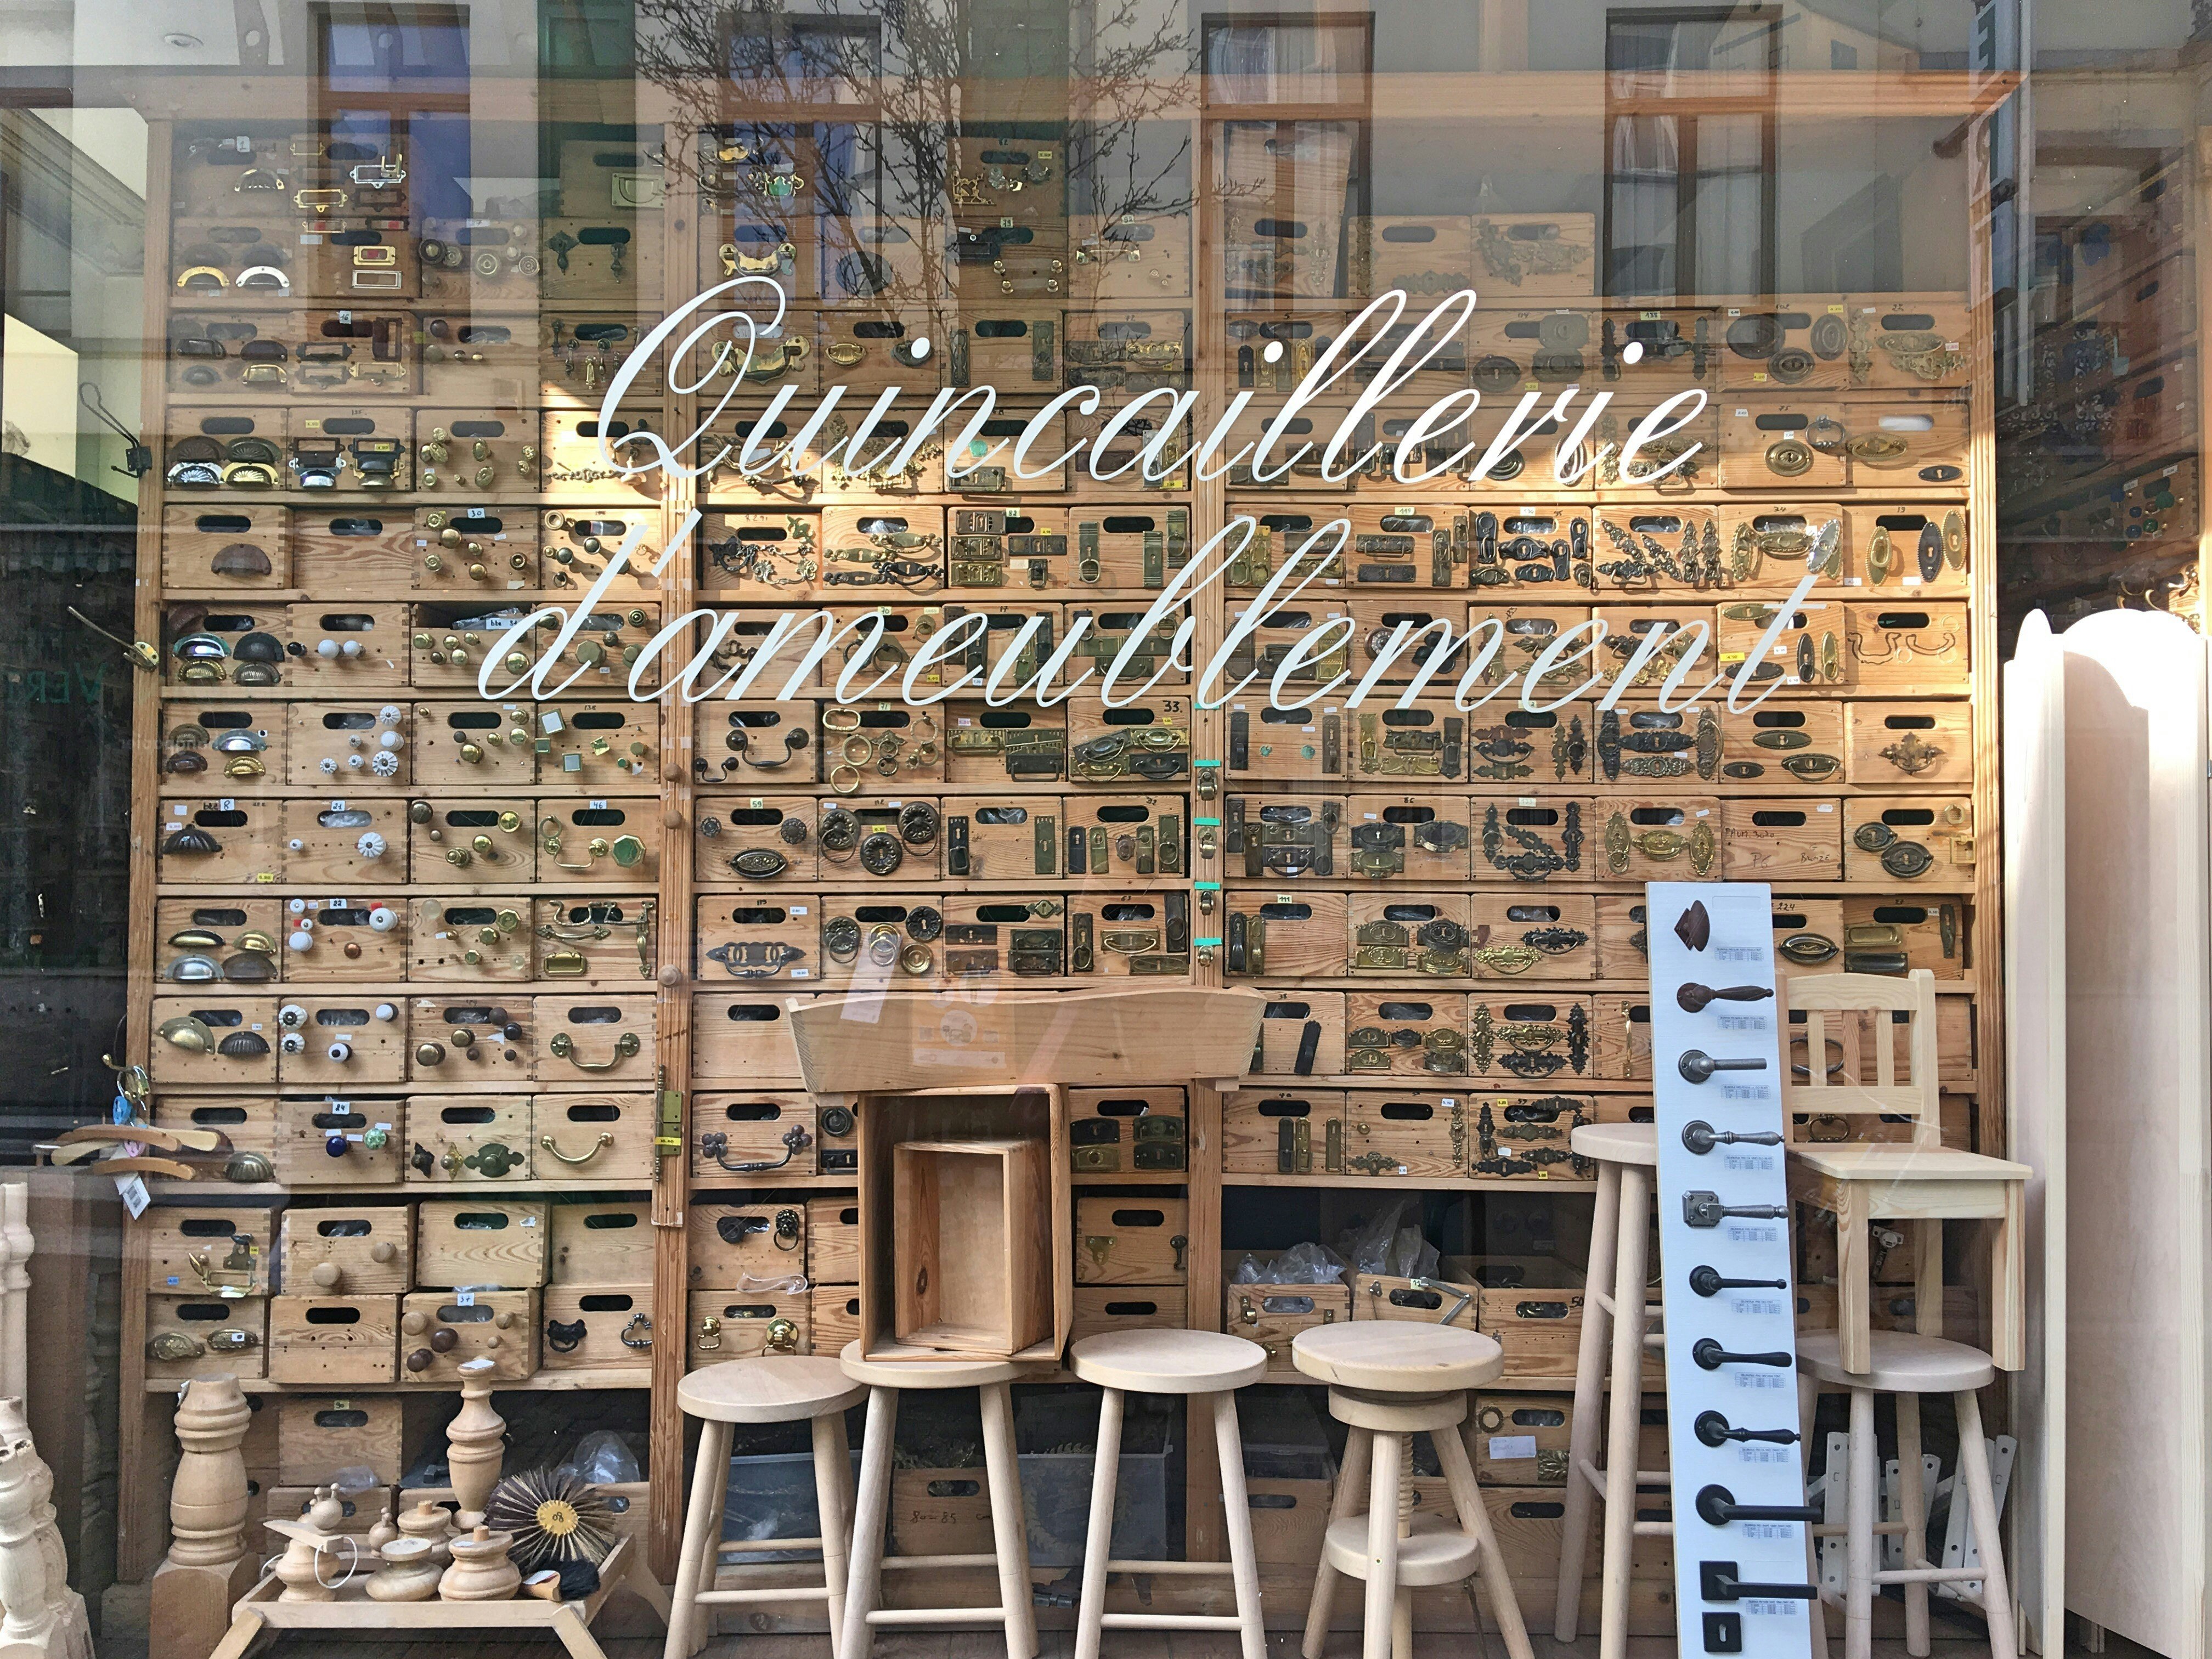 A shop window saying Quincaillerie d'ameublement in a cursive white script; the window contains rows and rows of wooden shelves adorned with handles, knobs and knockers; there are also stools and other wooden items on display.